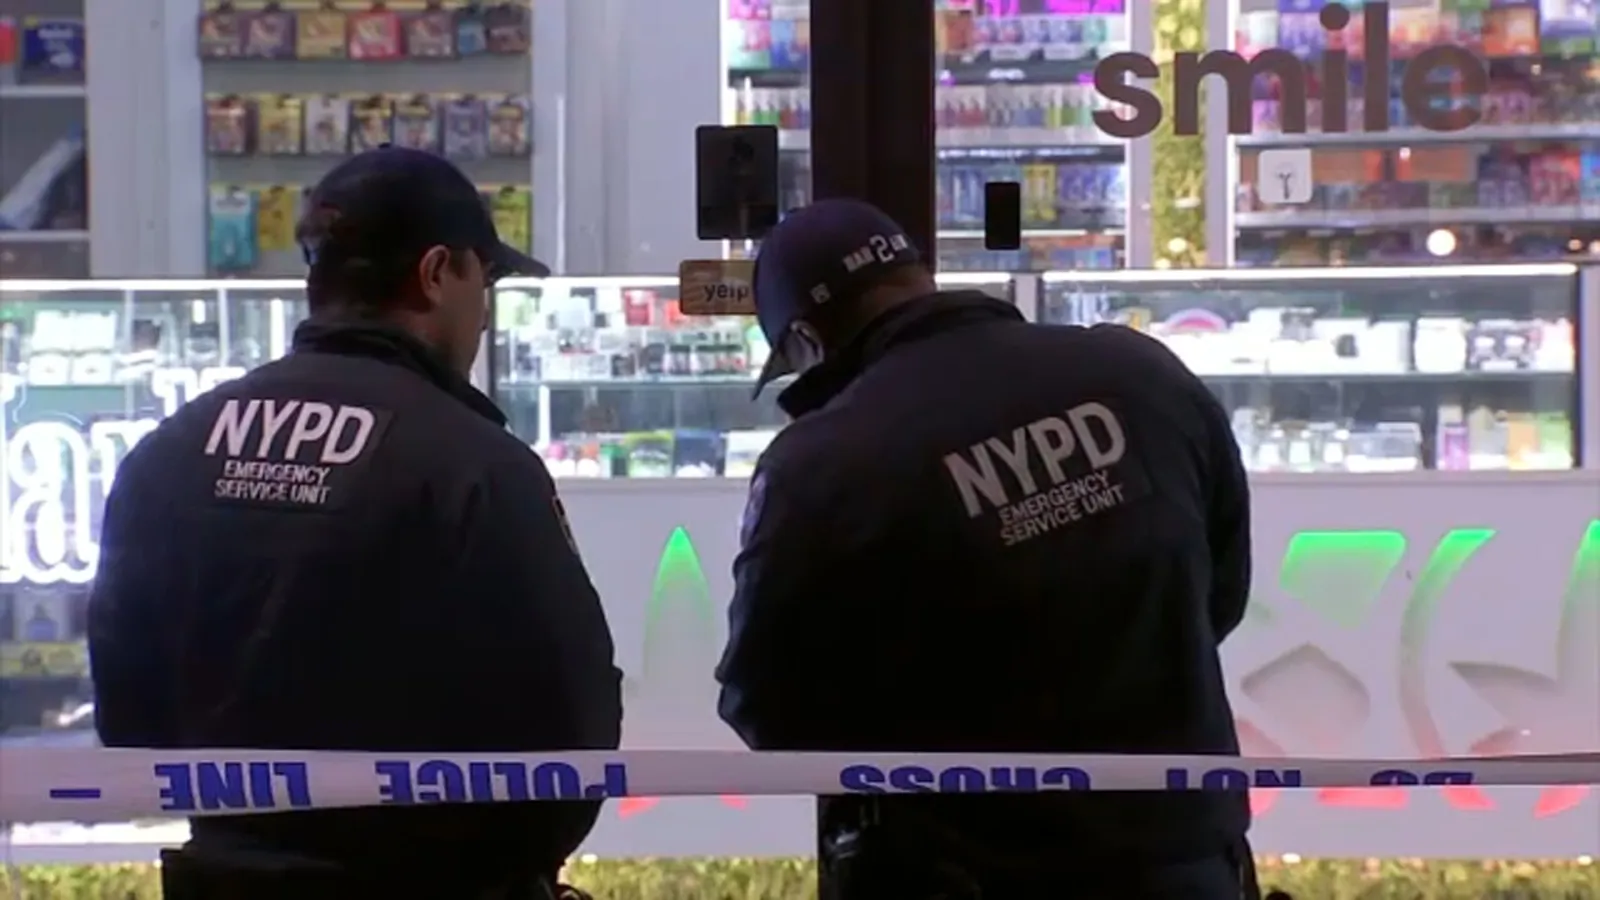 Store clerk shoots 15-year-old attempting to rob Upper East Side smoke shop: police sources